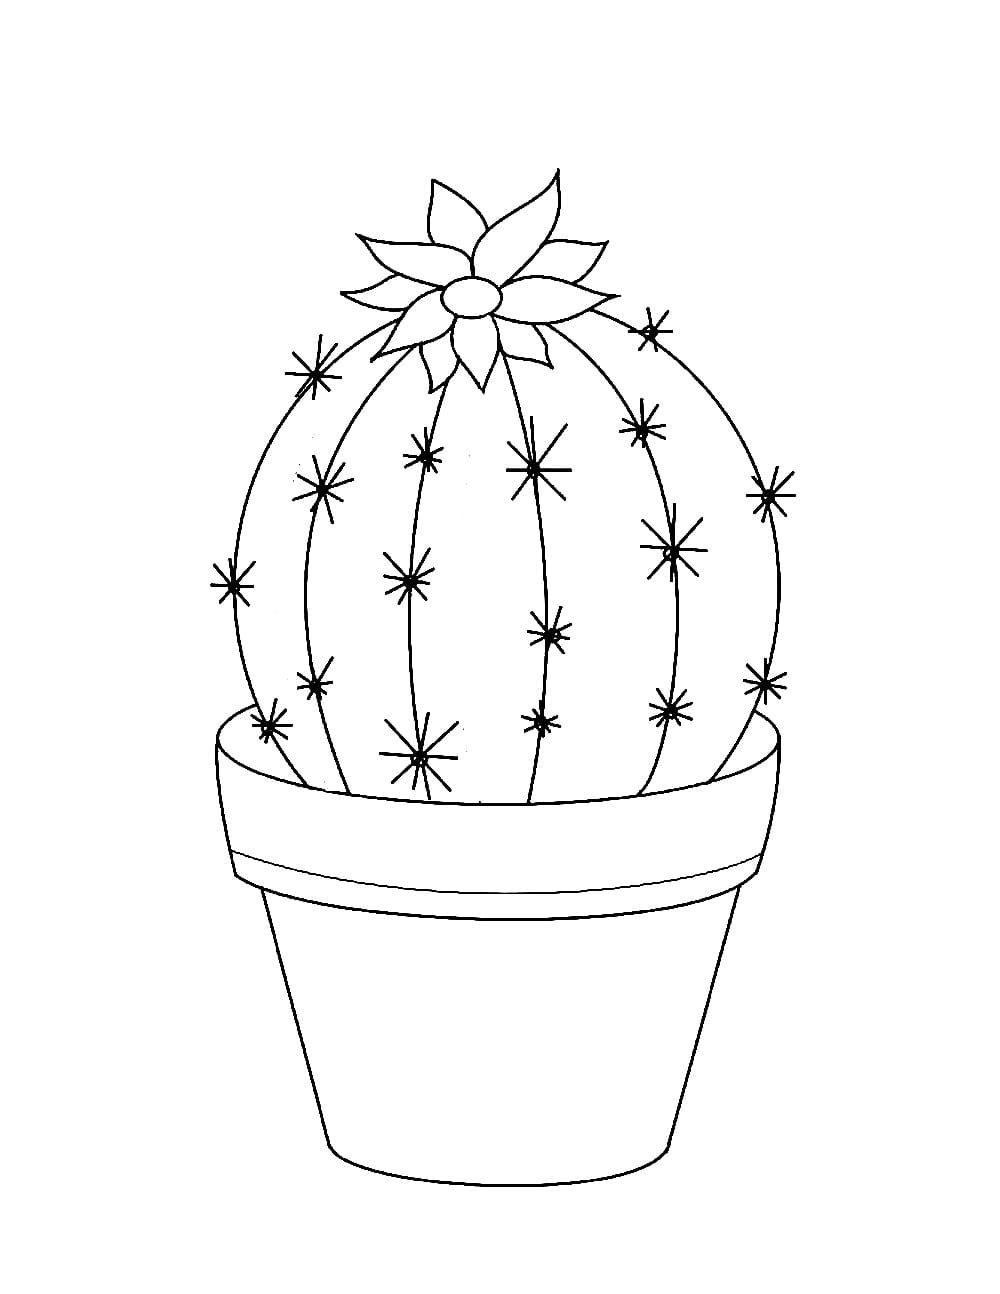 cactus-coloring-pages-100-coloring-pages-to-print-for-free